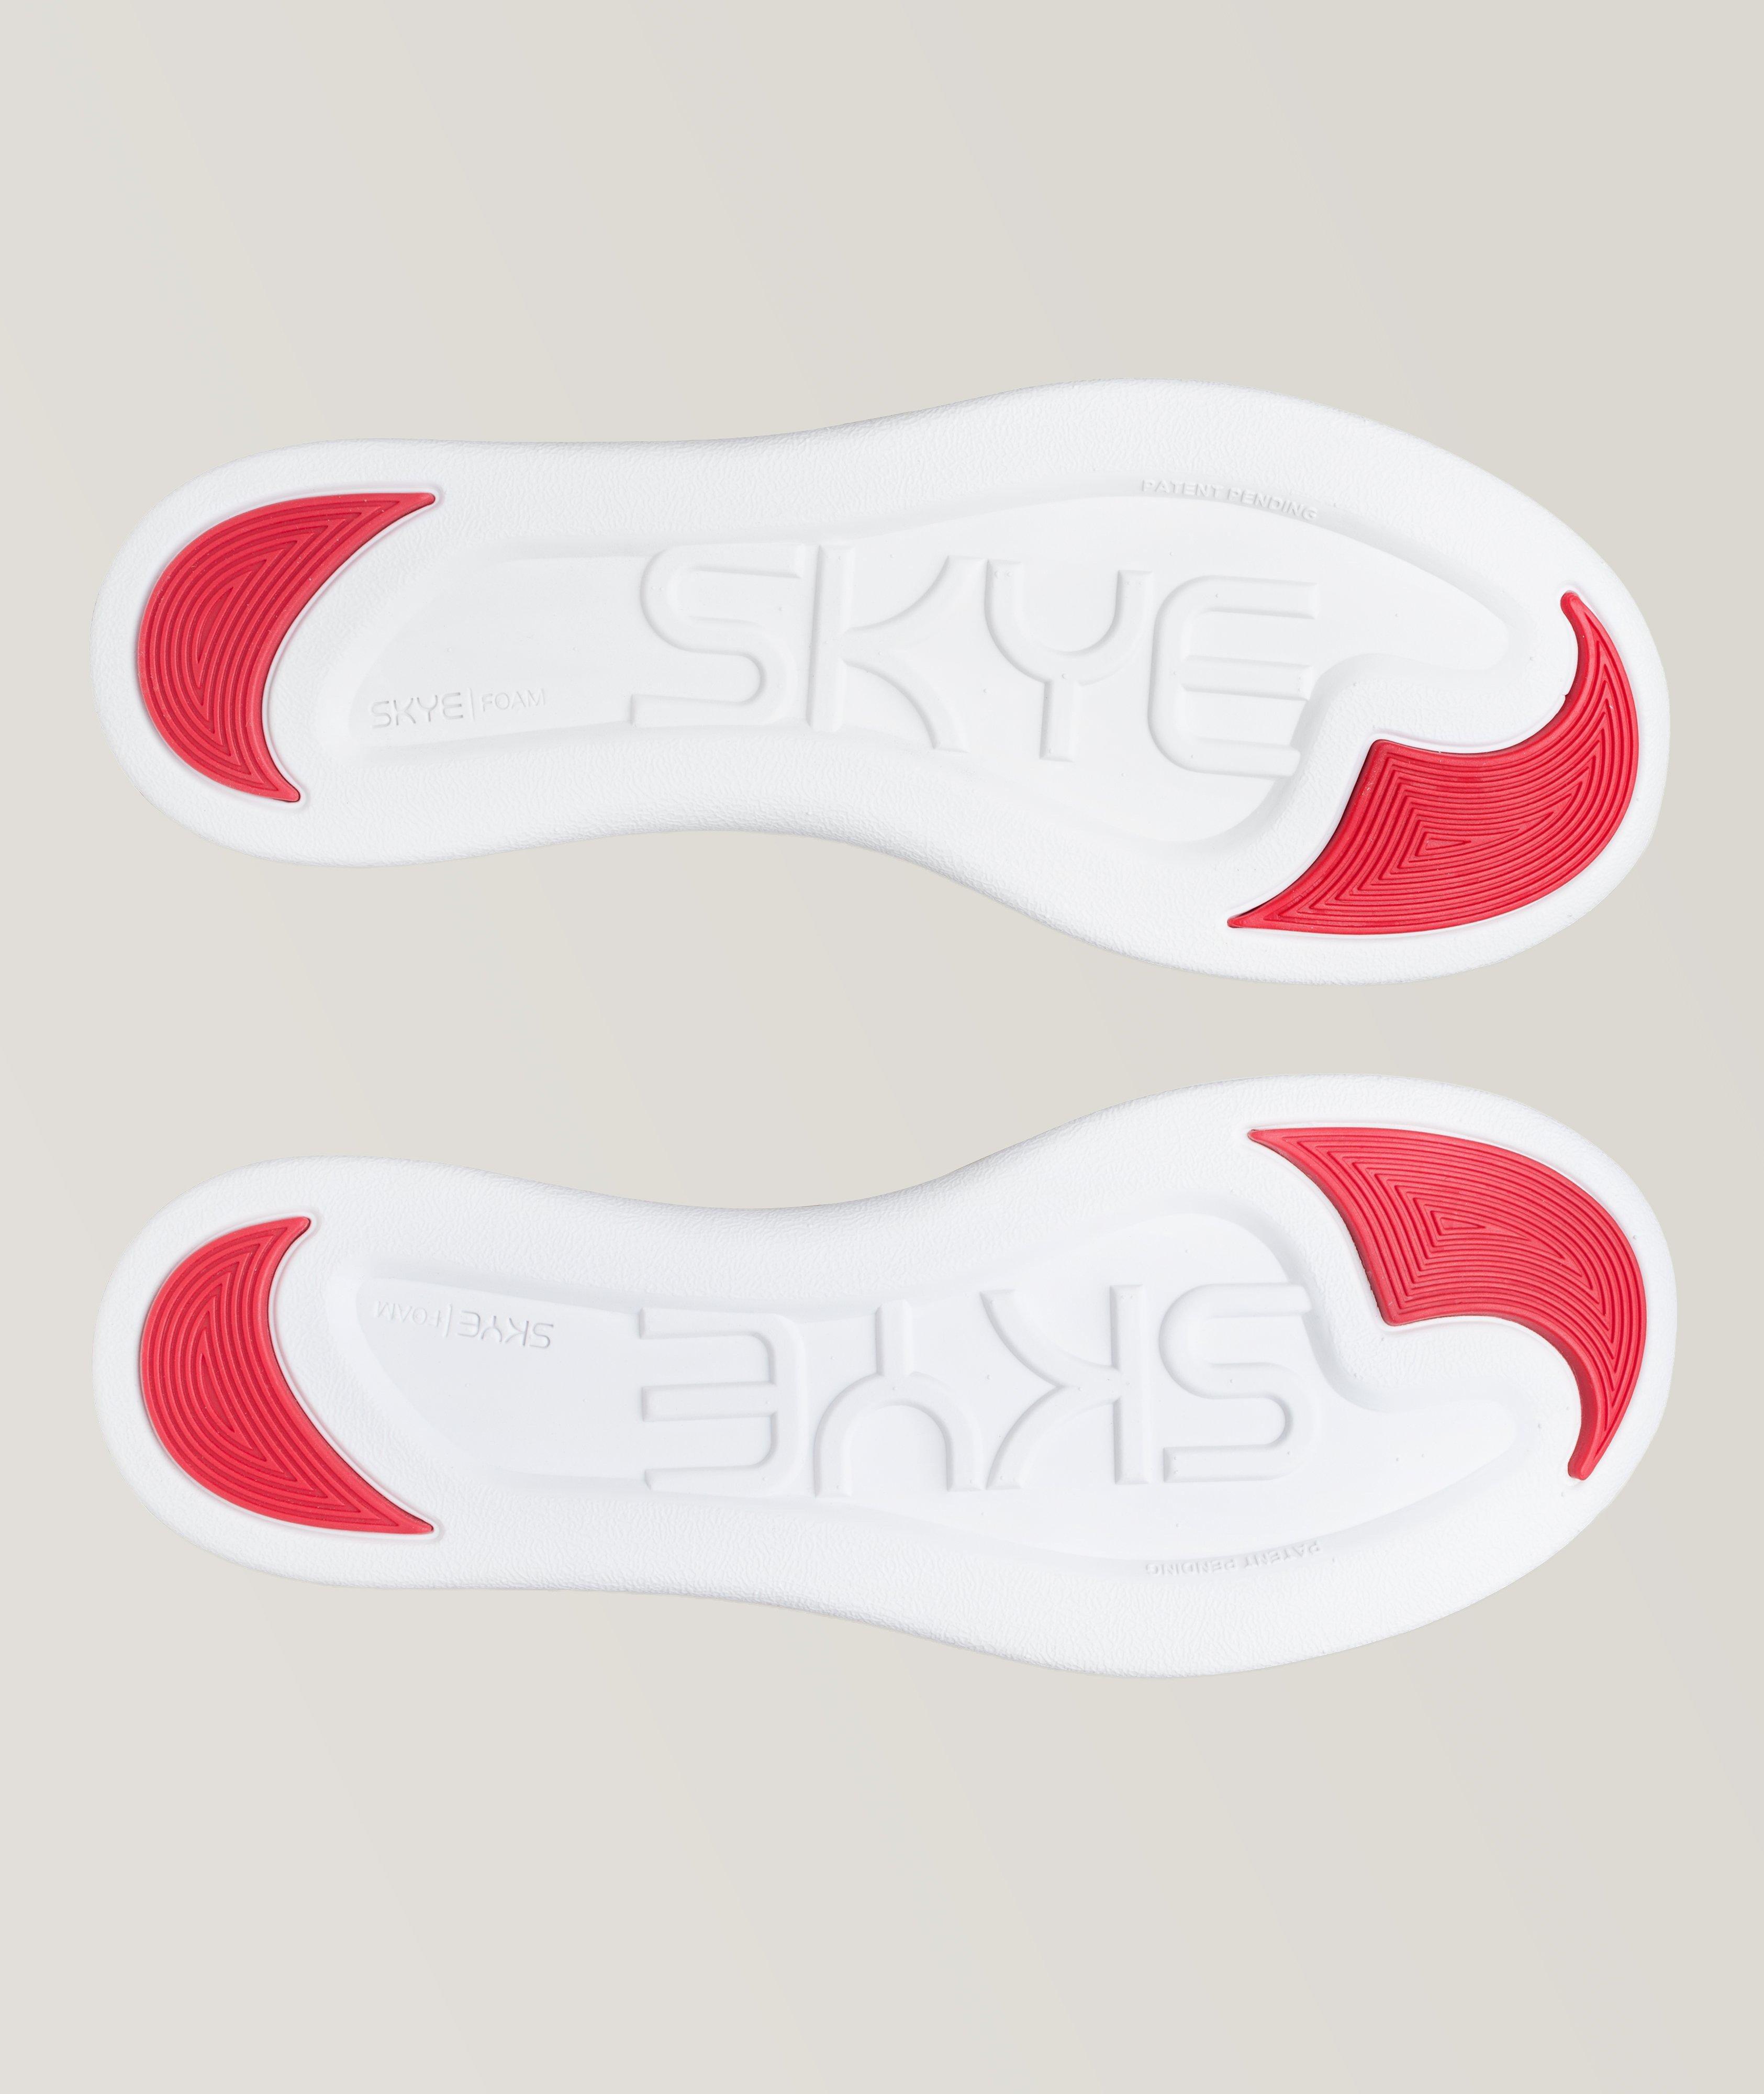 The Rbutus Slip-On Sneakers image 2